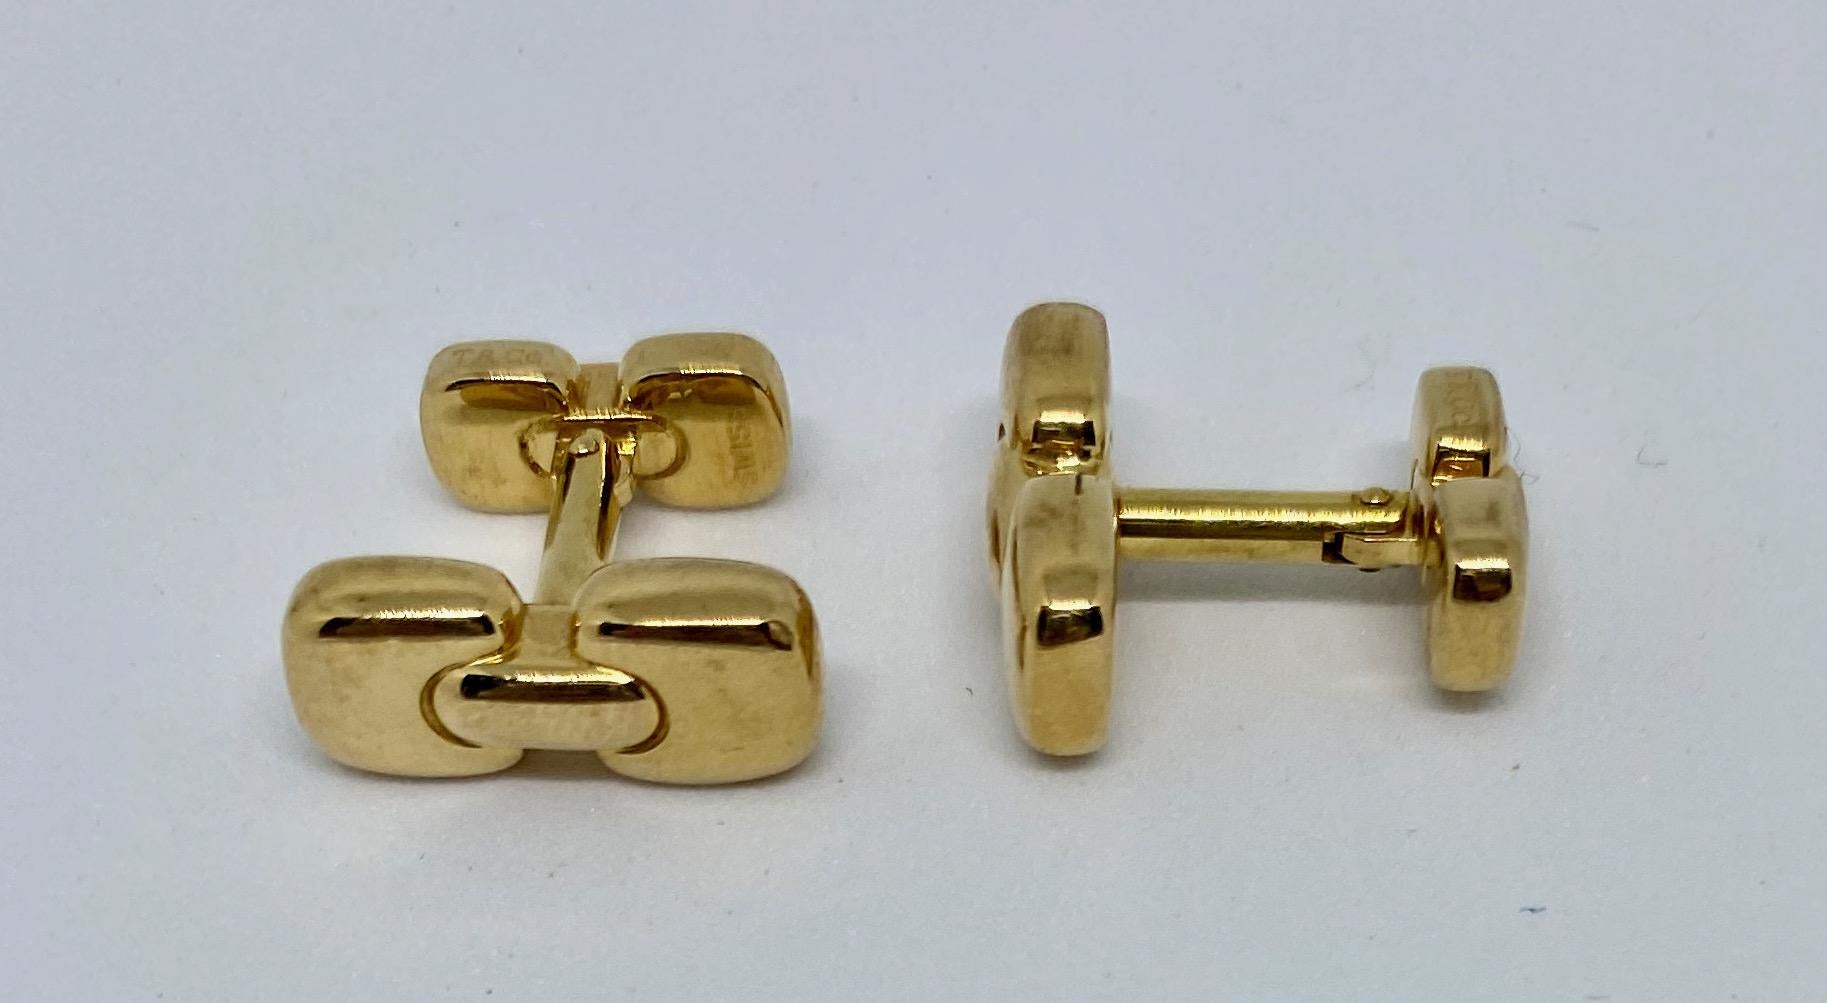 Classic Tiffany cufflinks in solid, 18K yellow gold featuring toggle backs.

Both cufflinks are marked 